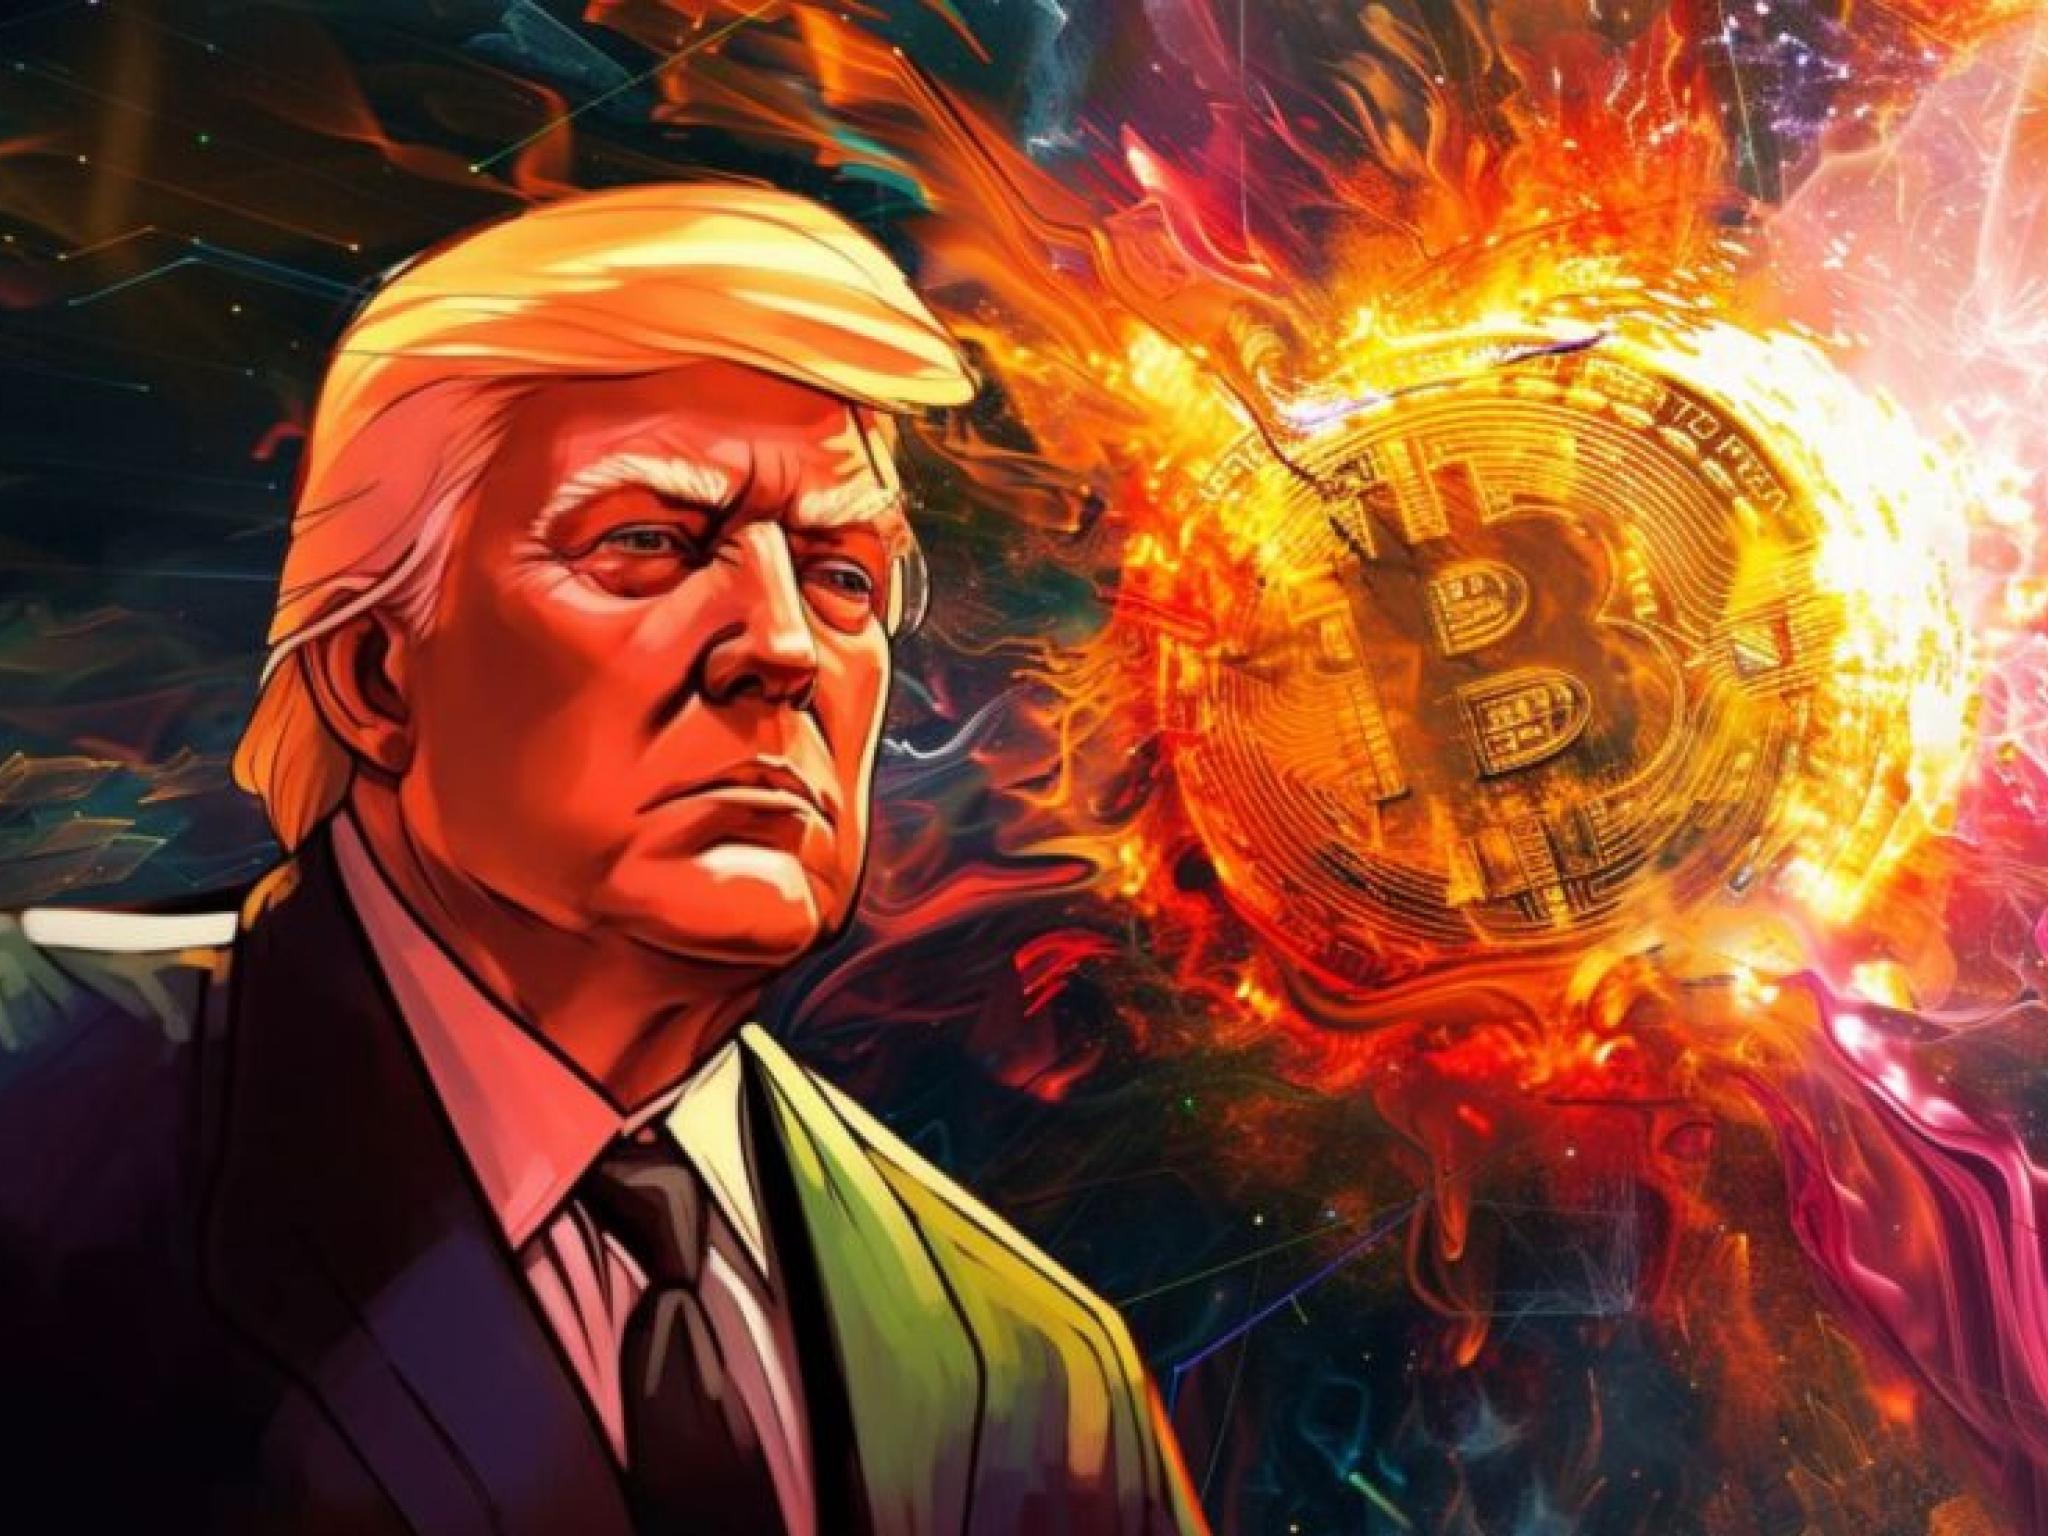  bitcoin-could-hit-100k-this-year-with-trump-jd-vances-pro-crypto-presidential-ticket-says-analyst 